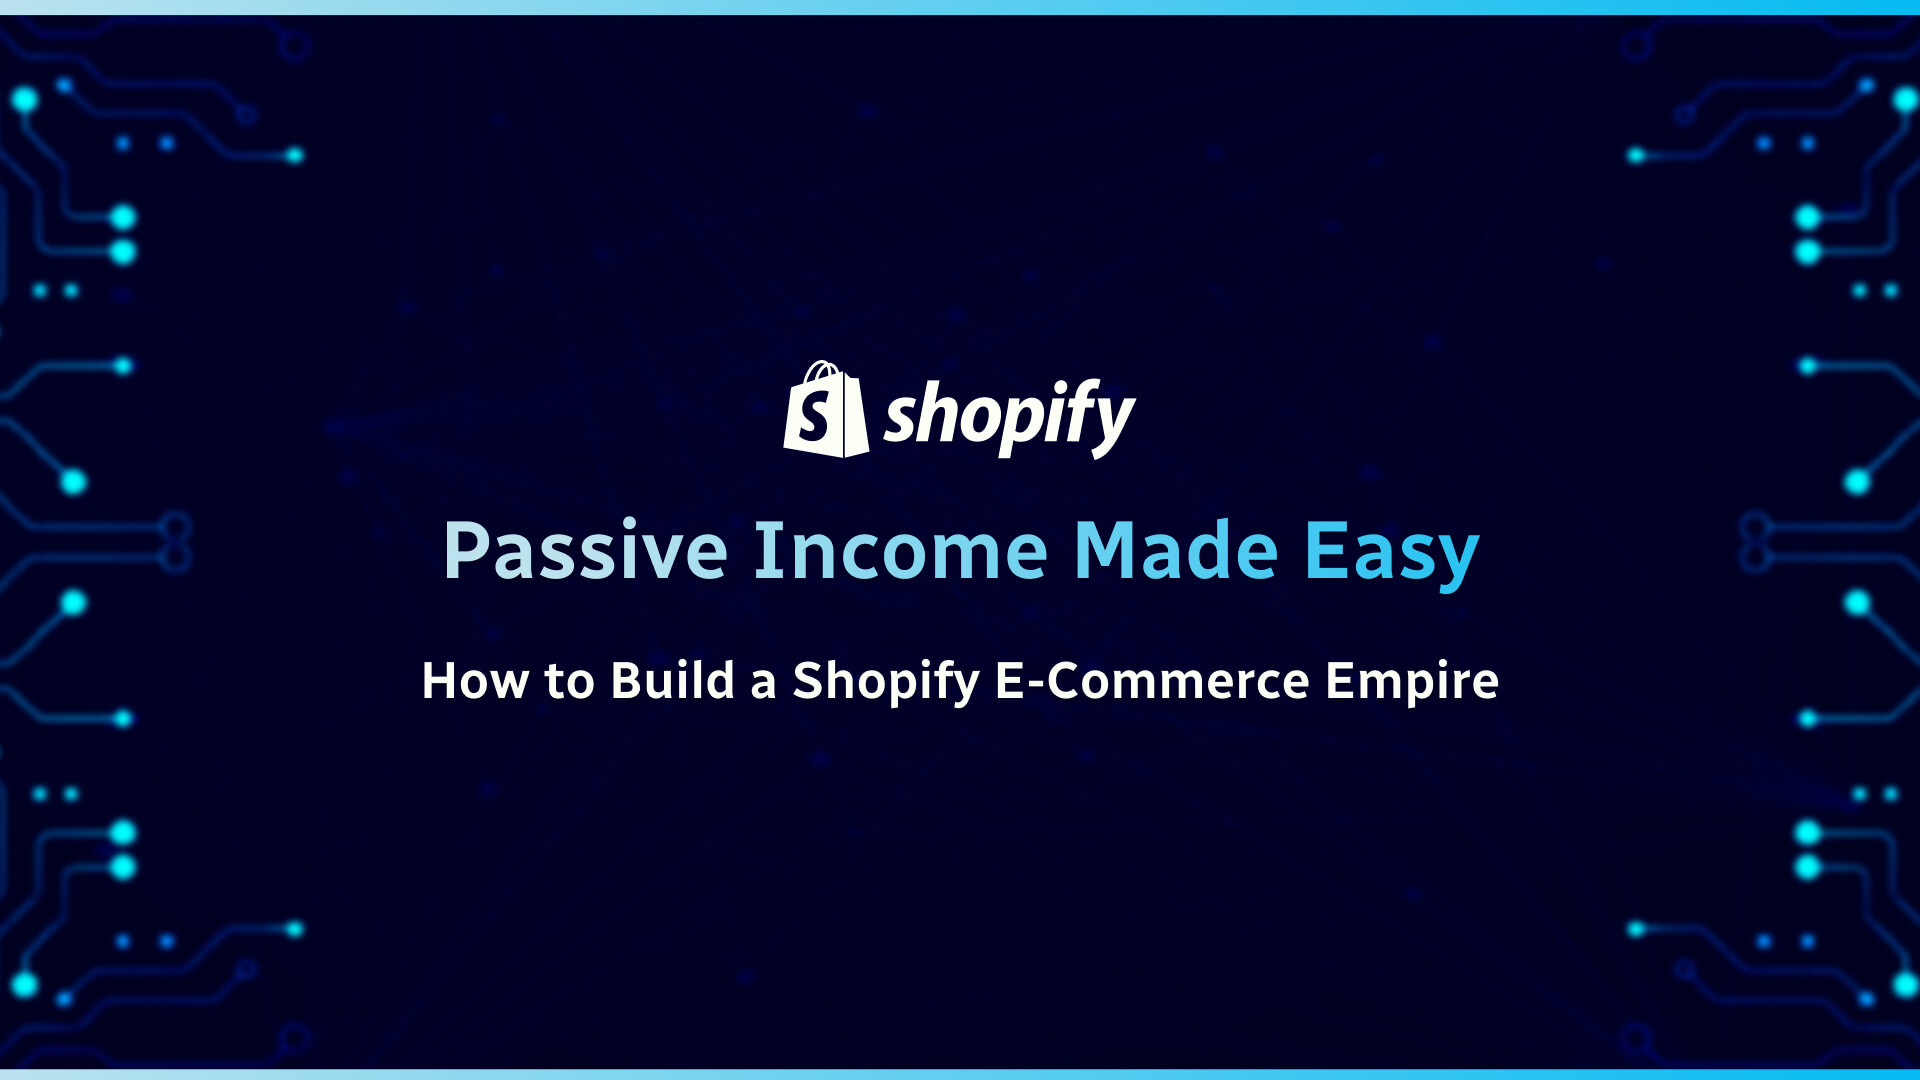 Passive Income Made Easy: How to Build a Shopify E-Commerce Empire